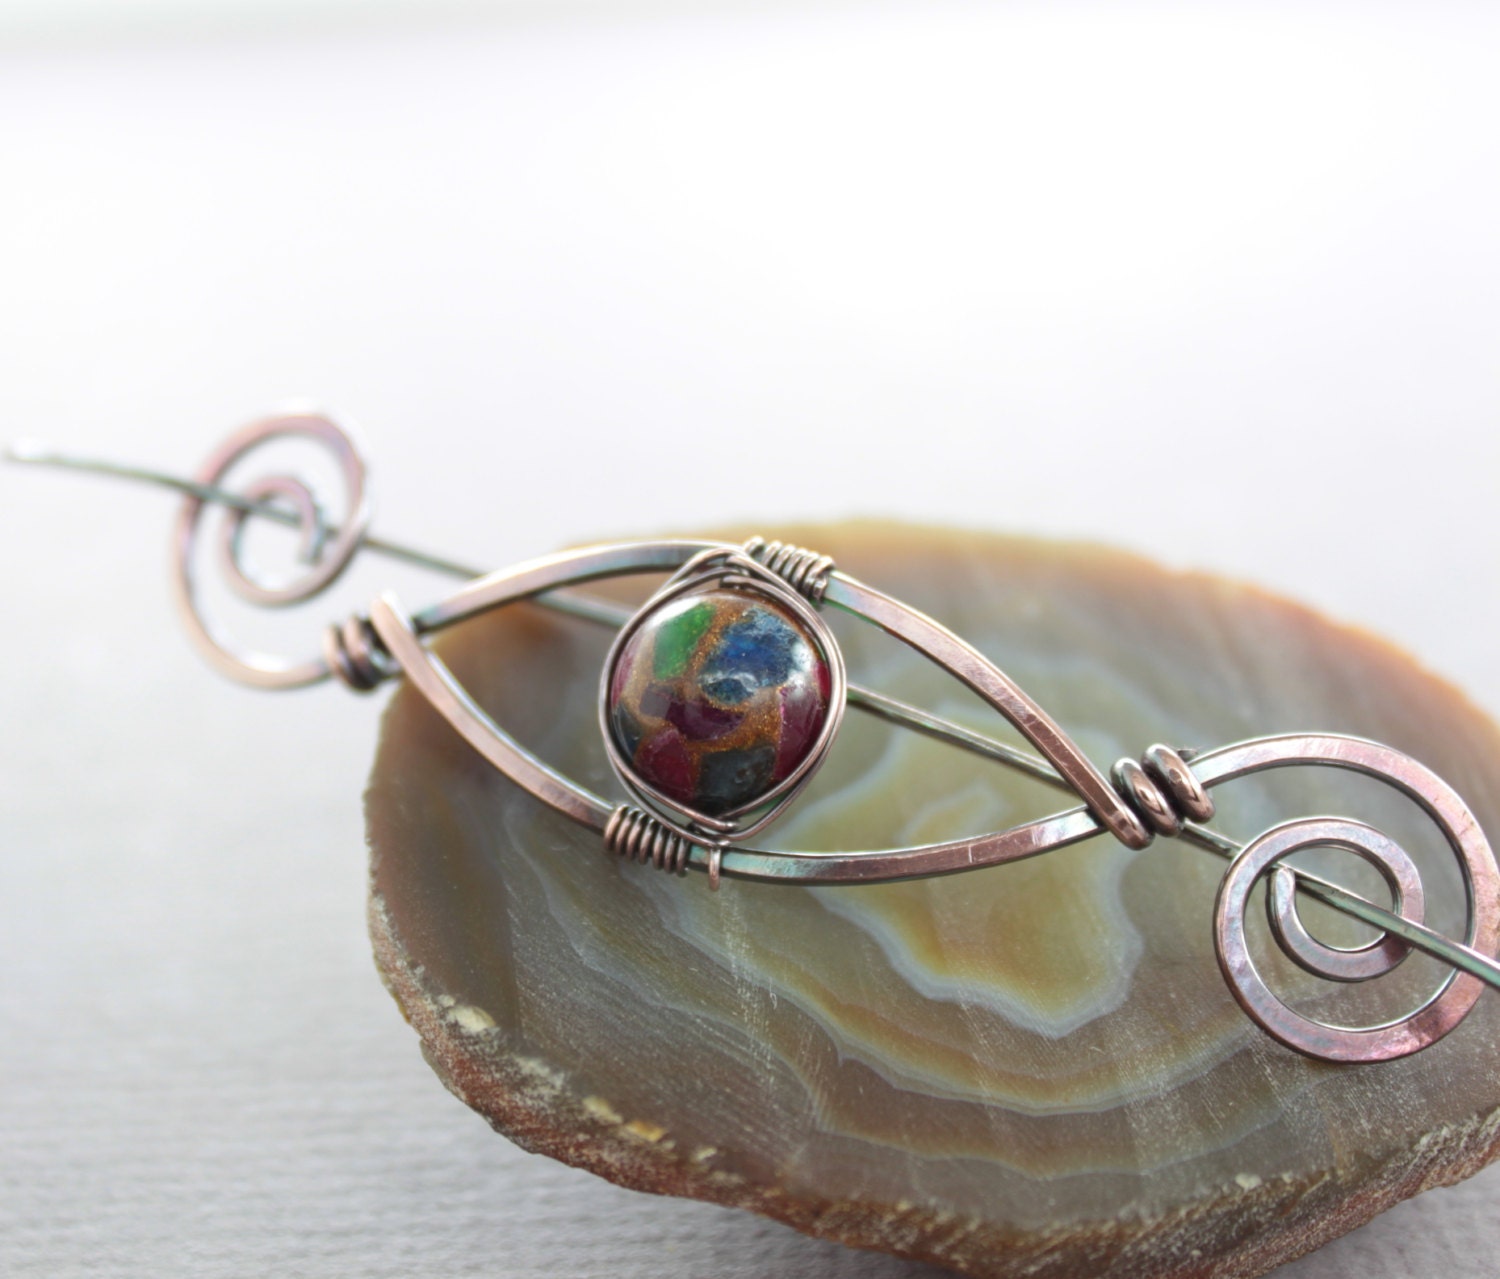 Hair barrette in a swirly eye design with copper and mosaic